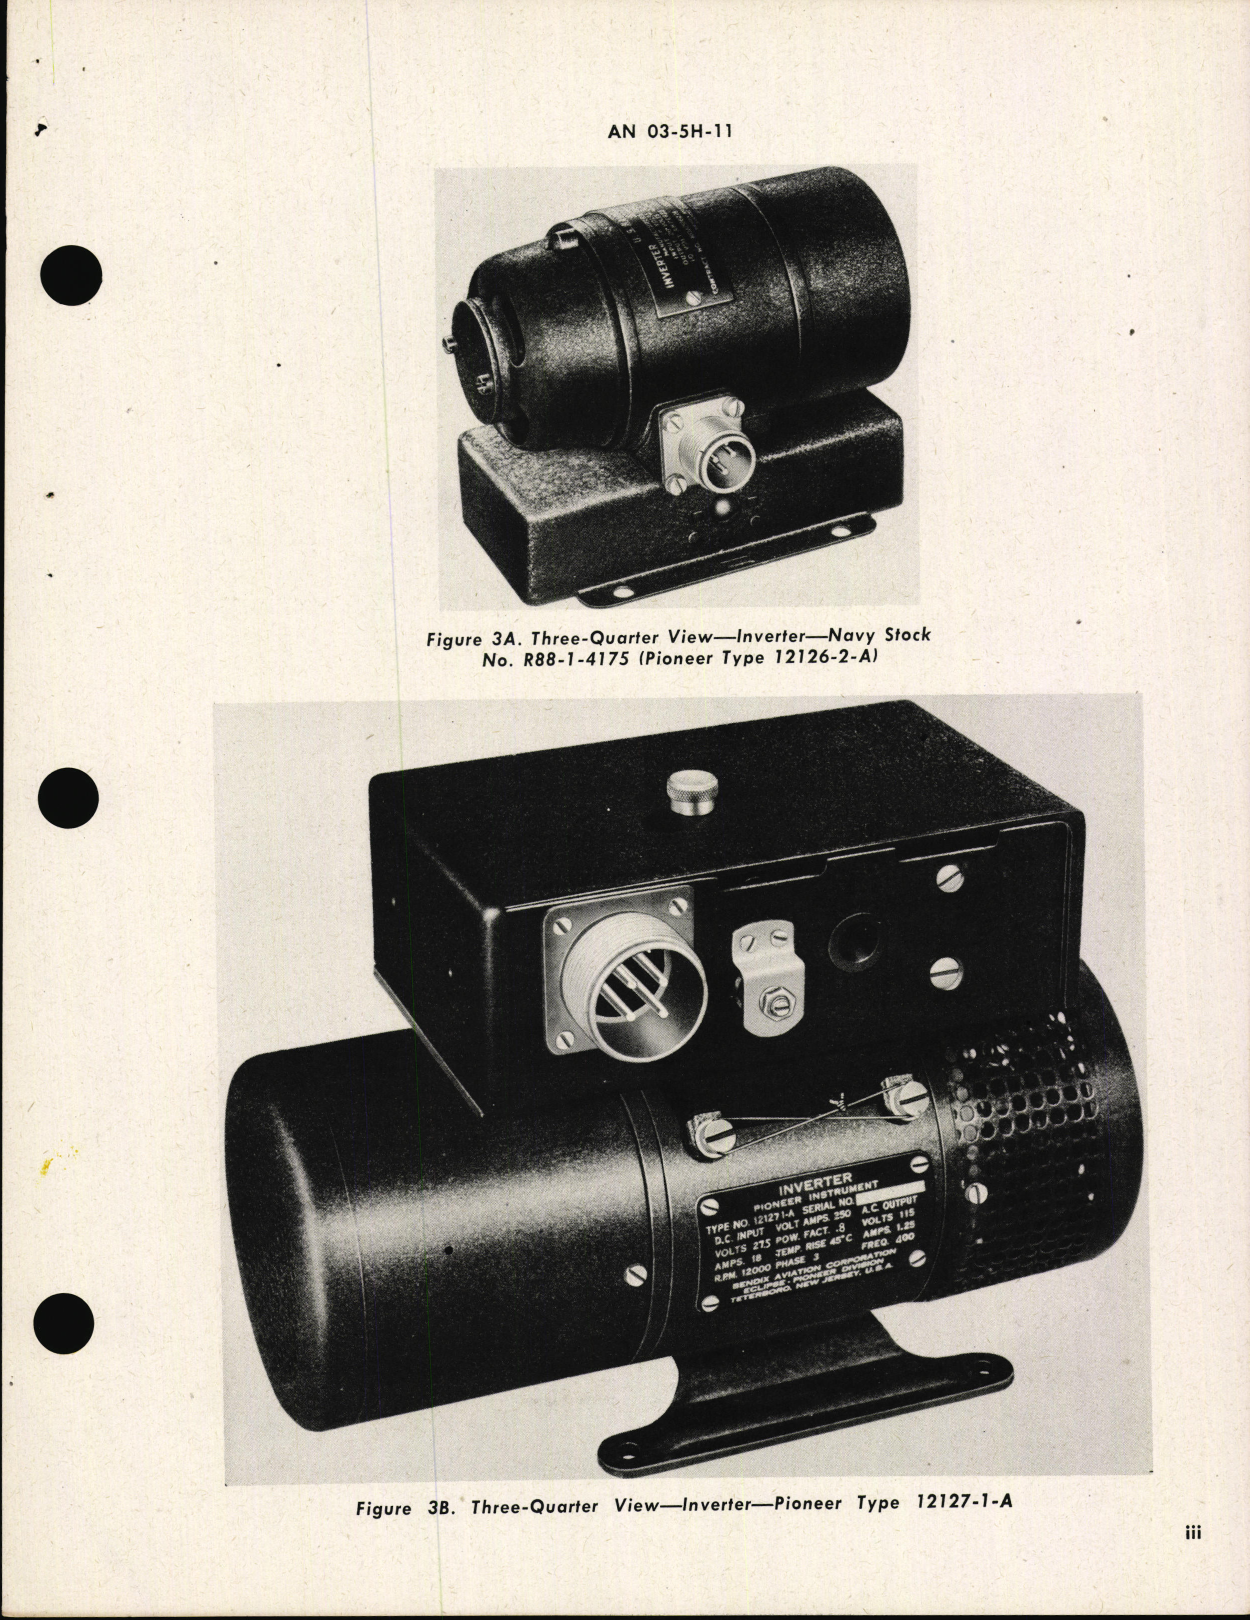 Sample page 5 from AirCorps Library document: Operation, Service & Overhaul Instructions with Parts Catalog for Inverters